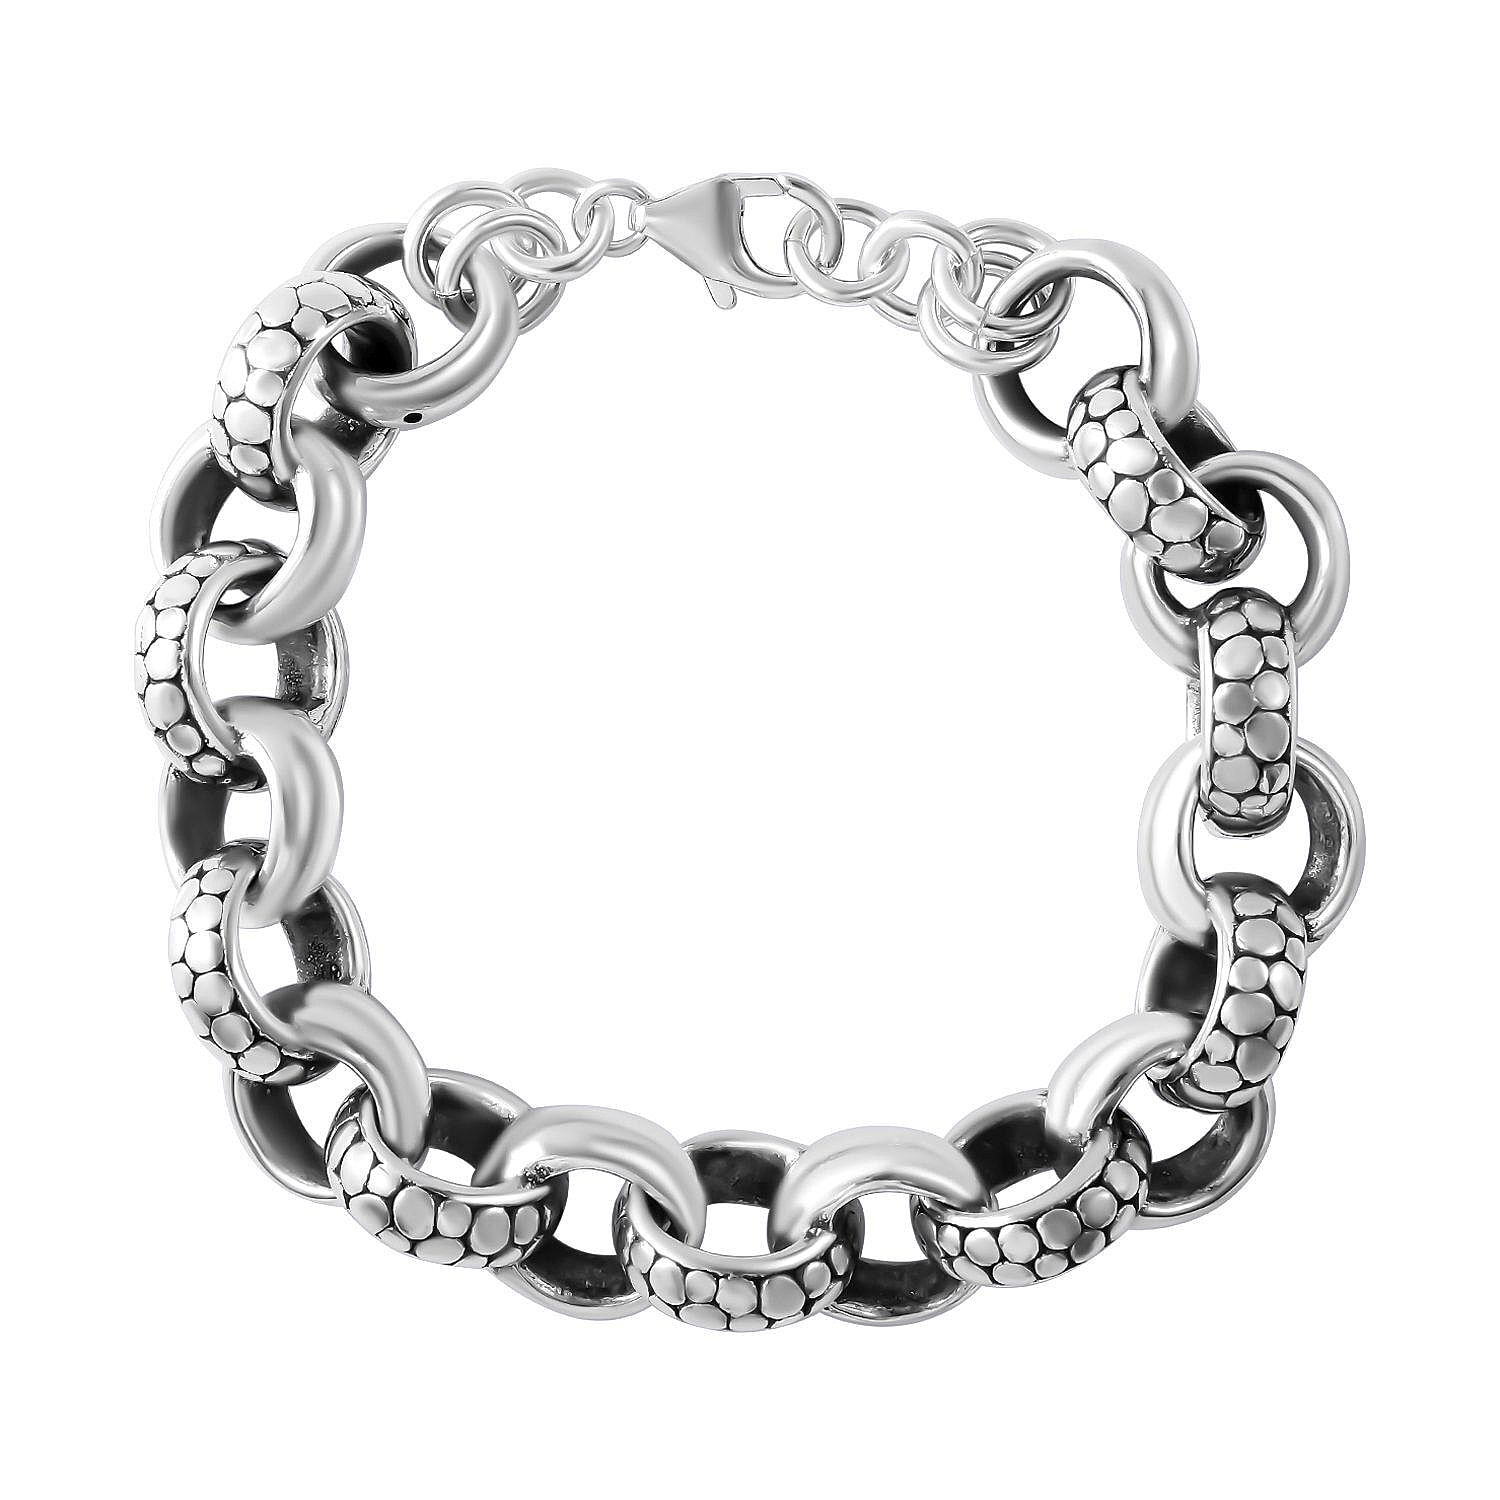 Cluster Bracelet Cartier  Get Best Price from Manufacturers  Suppliers in  India